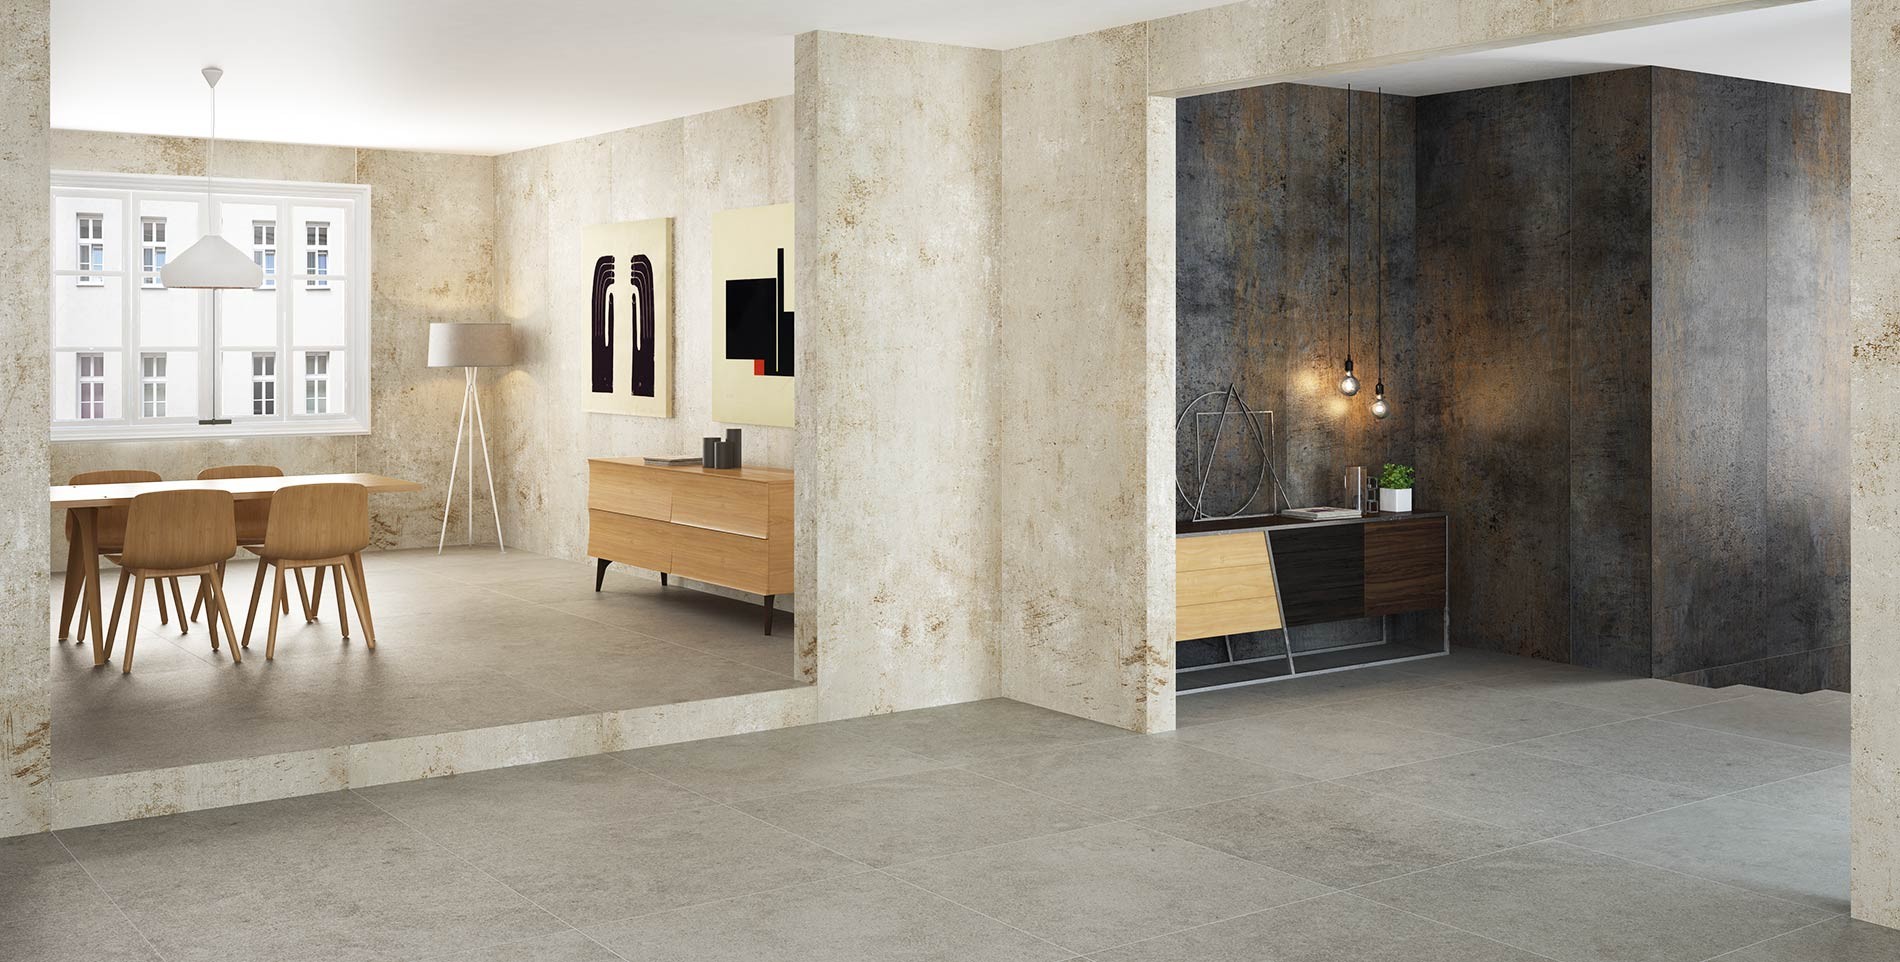 TECHLAM® | THE PORCELAIN TILES THAT WILL MAKE YOUR HOME RENOVATION SIMPLER AND EASIER